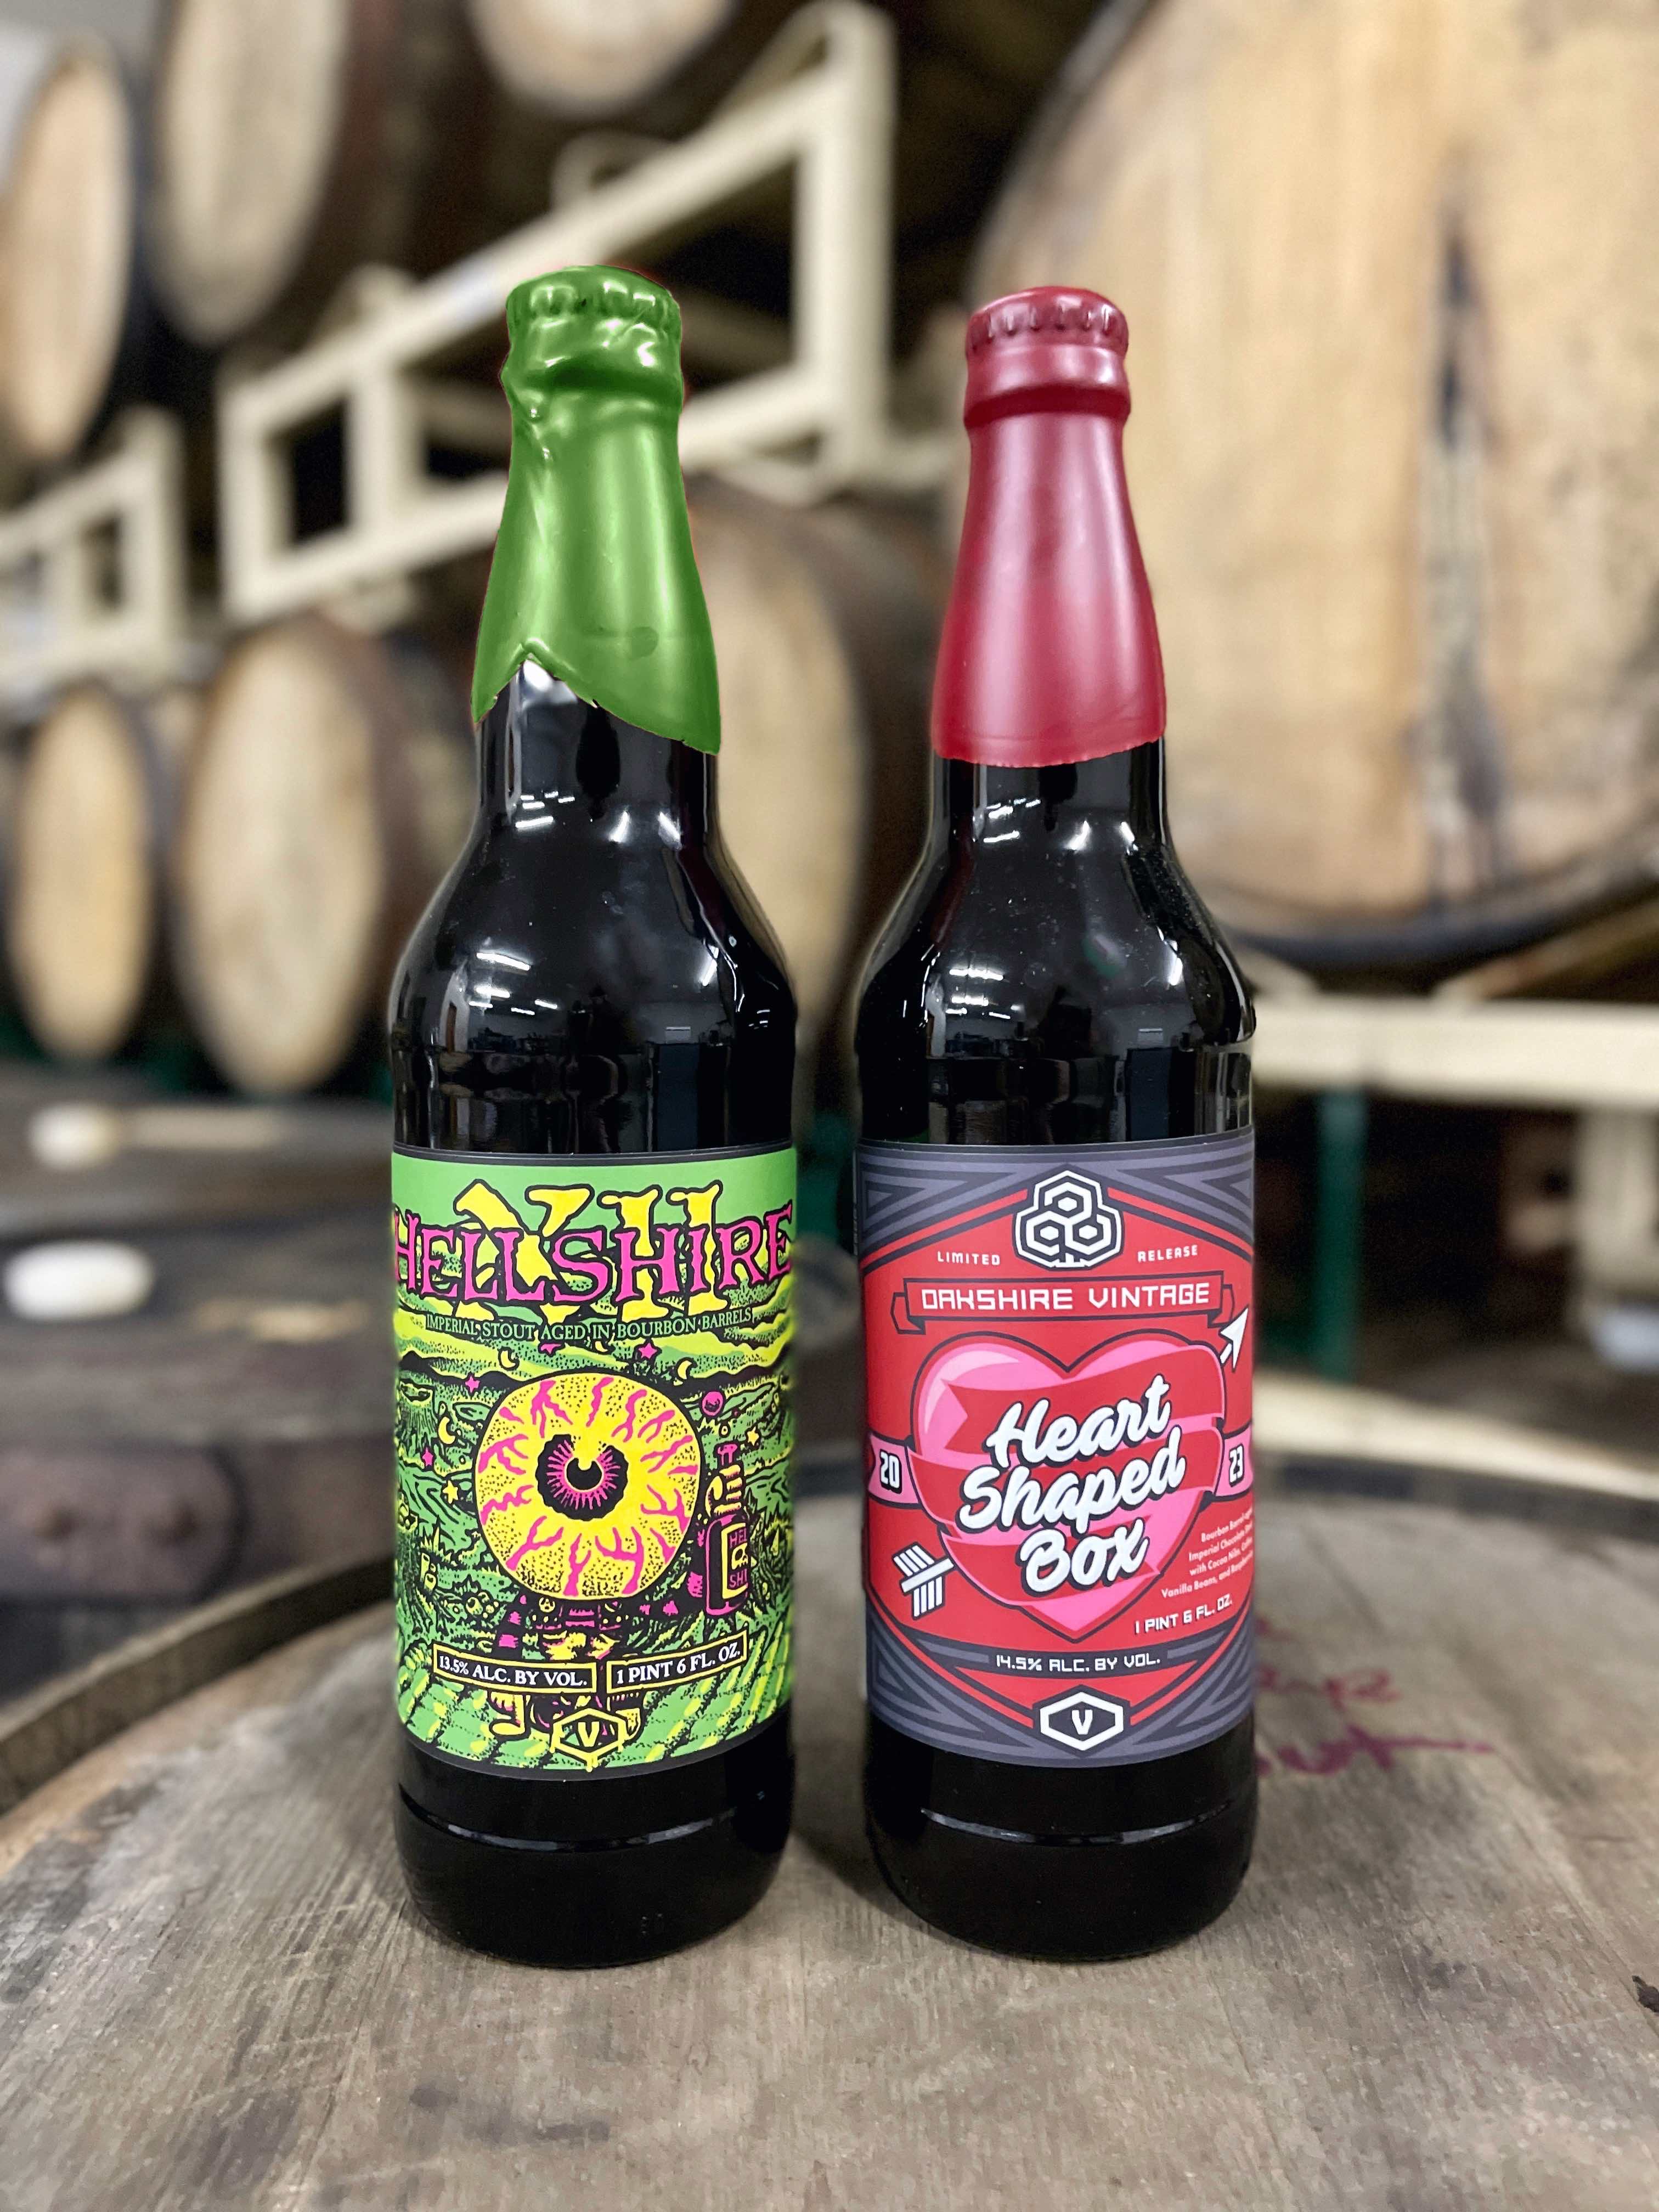 image of Hellshire XII and Hear Shaped Box courtesy of Oakshire Brewing